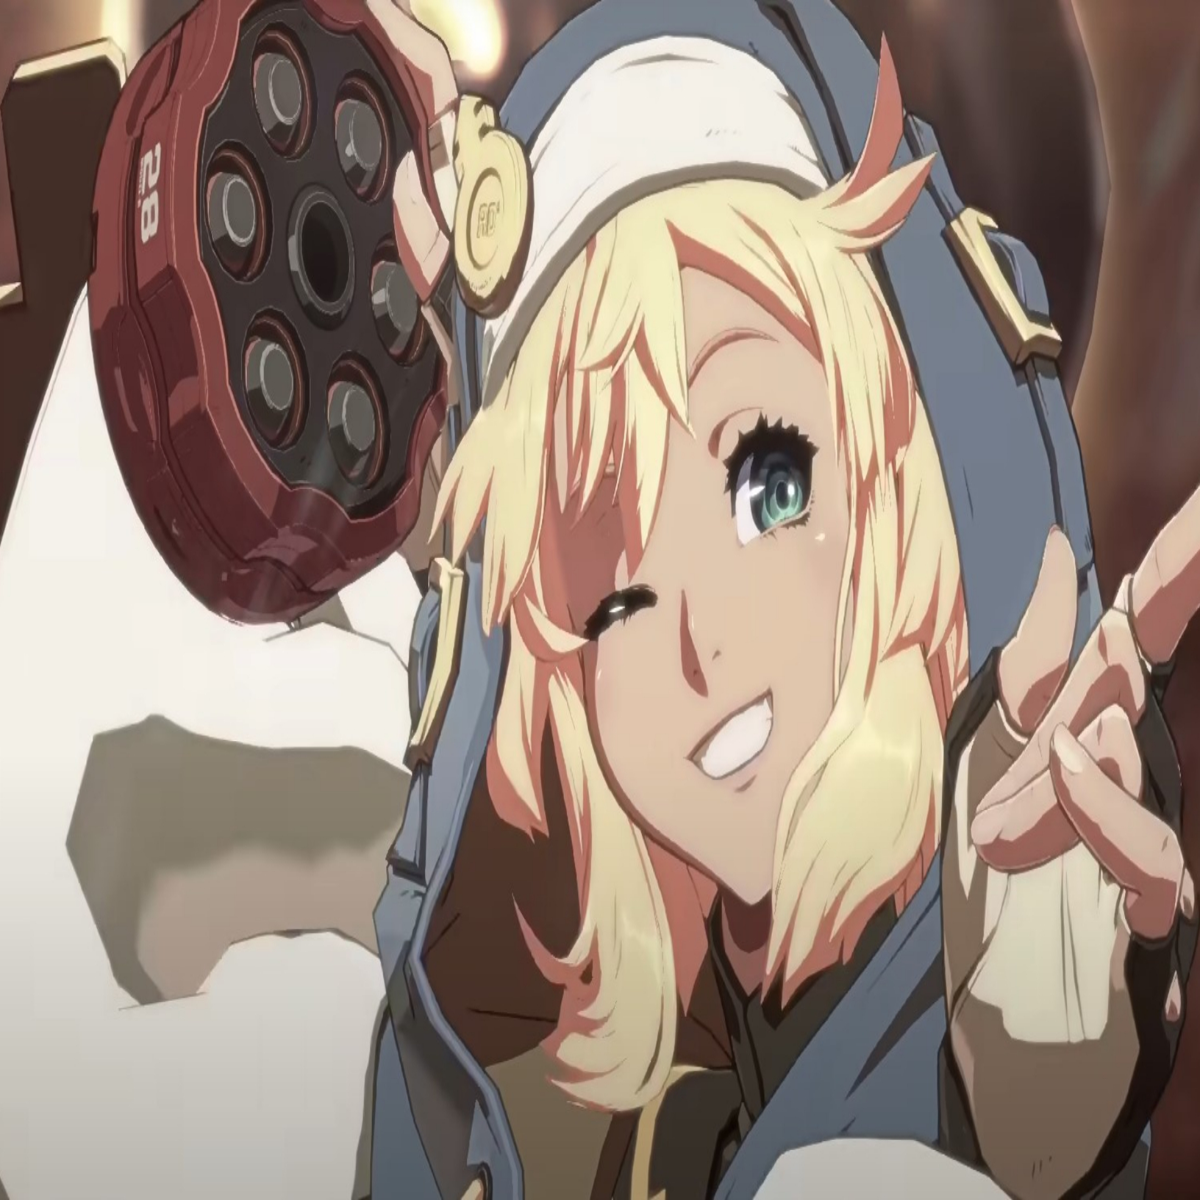 Bridget boosts Guilty Gear Strive's player count as the